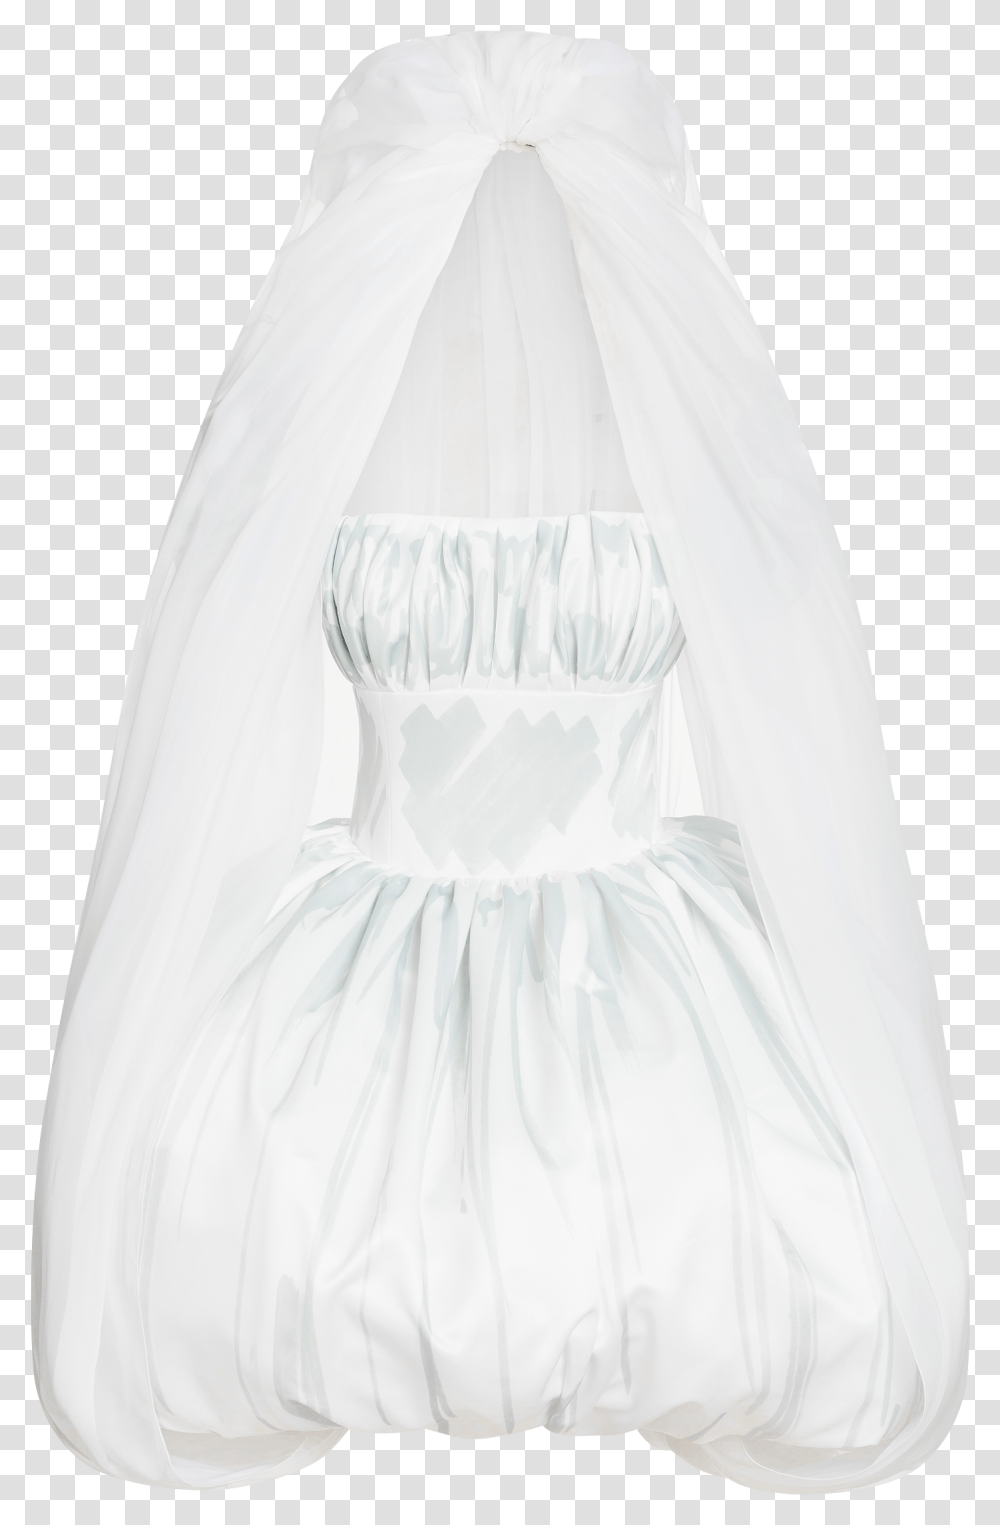 Download Bridal Veil Image With No Gown, Clothing, Apparel, Wedding Gown, Robe Transparent Png